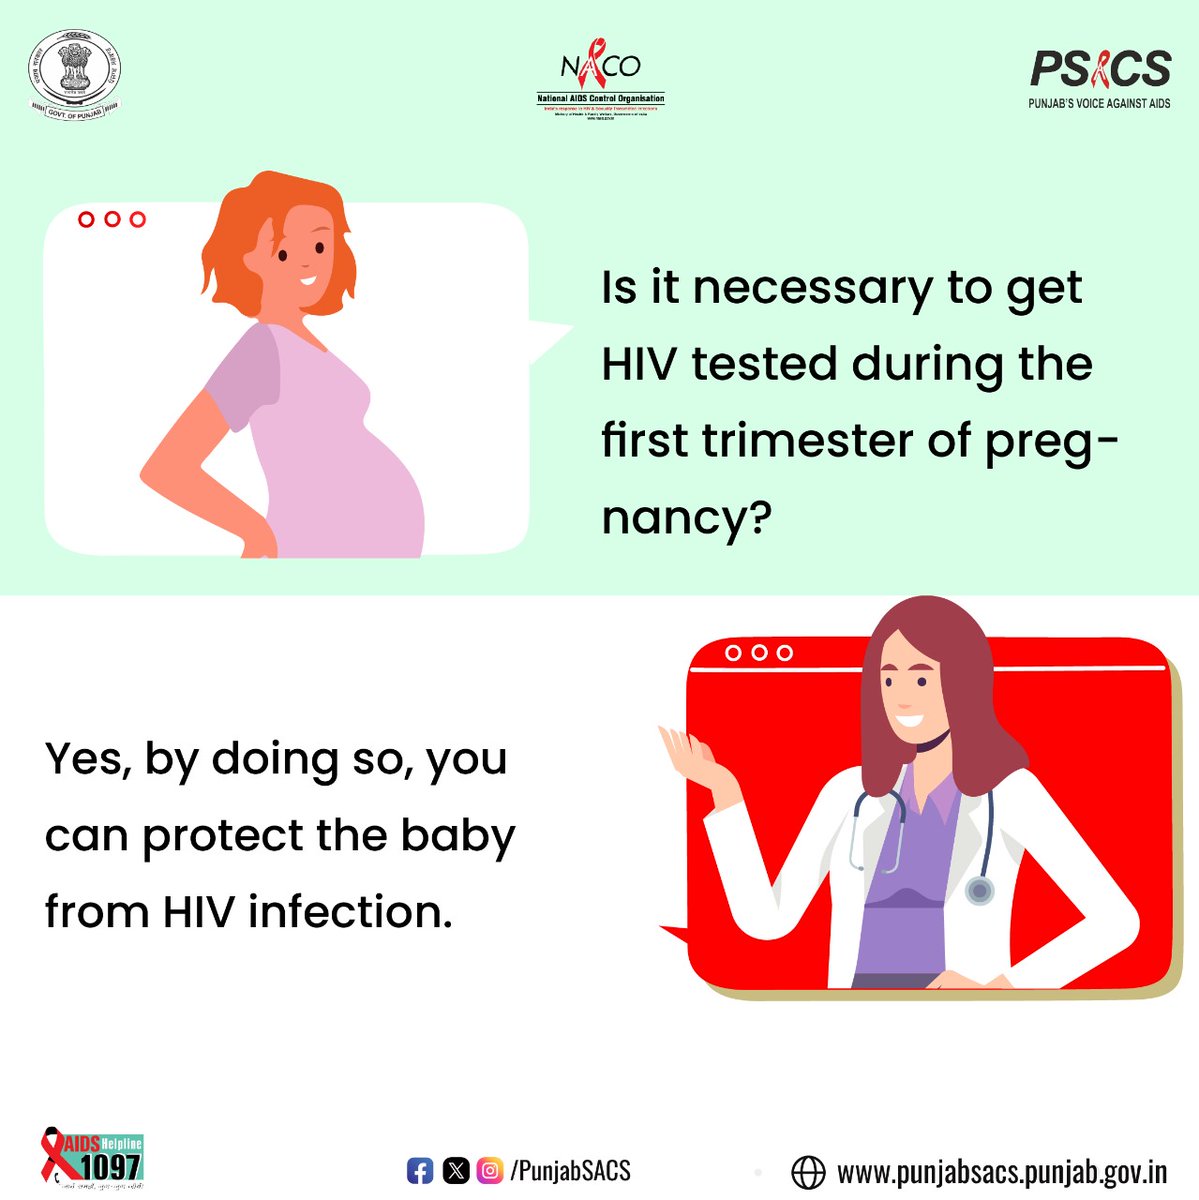 Yes, by doing so, you can protect the baby from HIV infection.

#HIVTesting #GetTested #KnowYourHIVStatus #Dial1097 #KnowAIDS #HIVTestingisImportant #KnowHIV #HIVFreeIndia #CorrectInformation #NACOINDIA #NACO #India